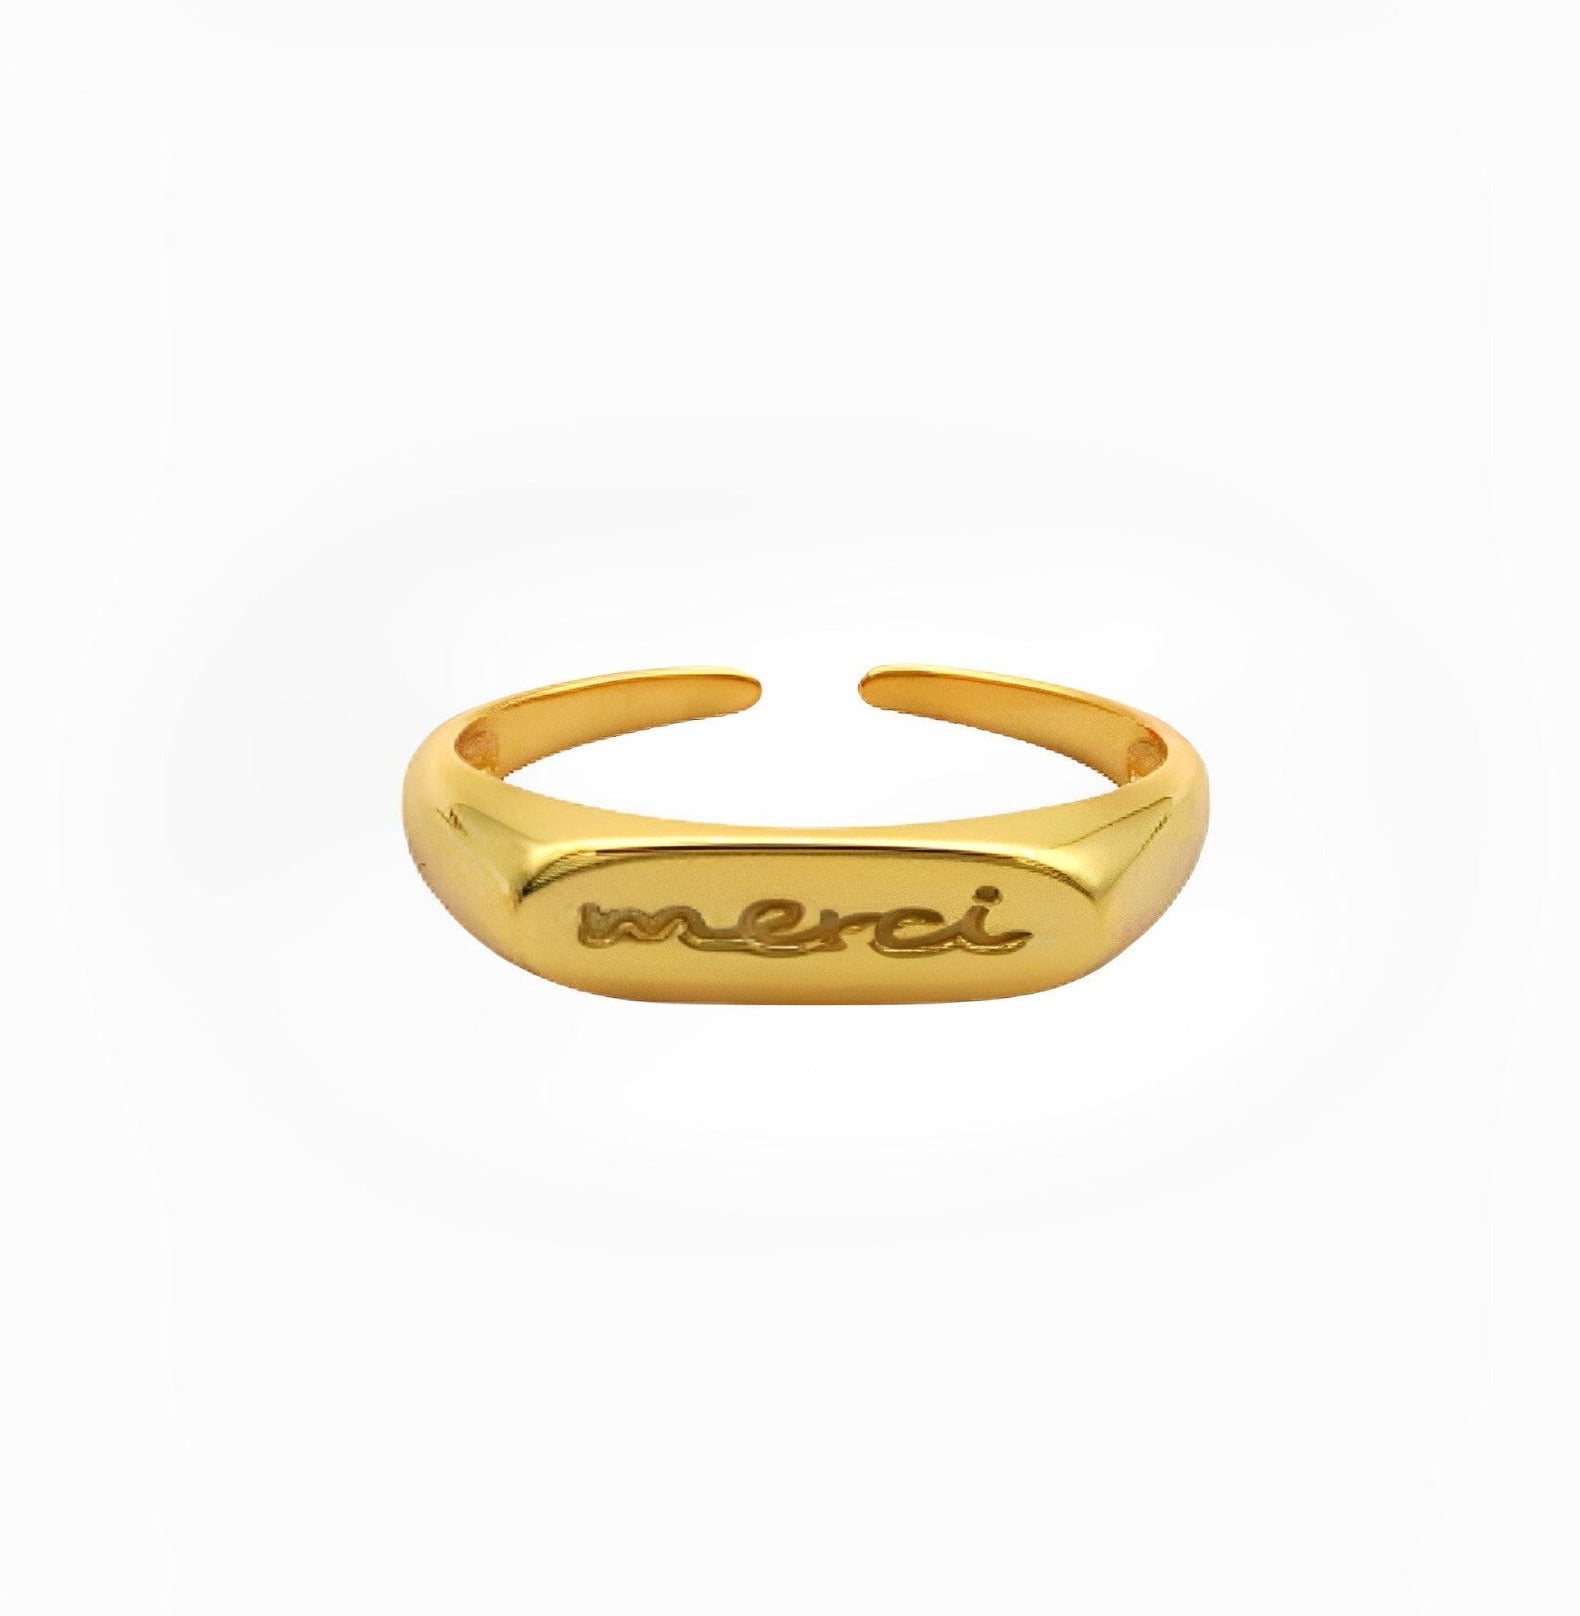 MERCI RING ring Yubama Jewelry Online Store - The Elegant Designs of Gold and Silver ! 